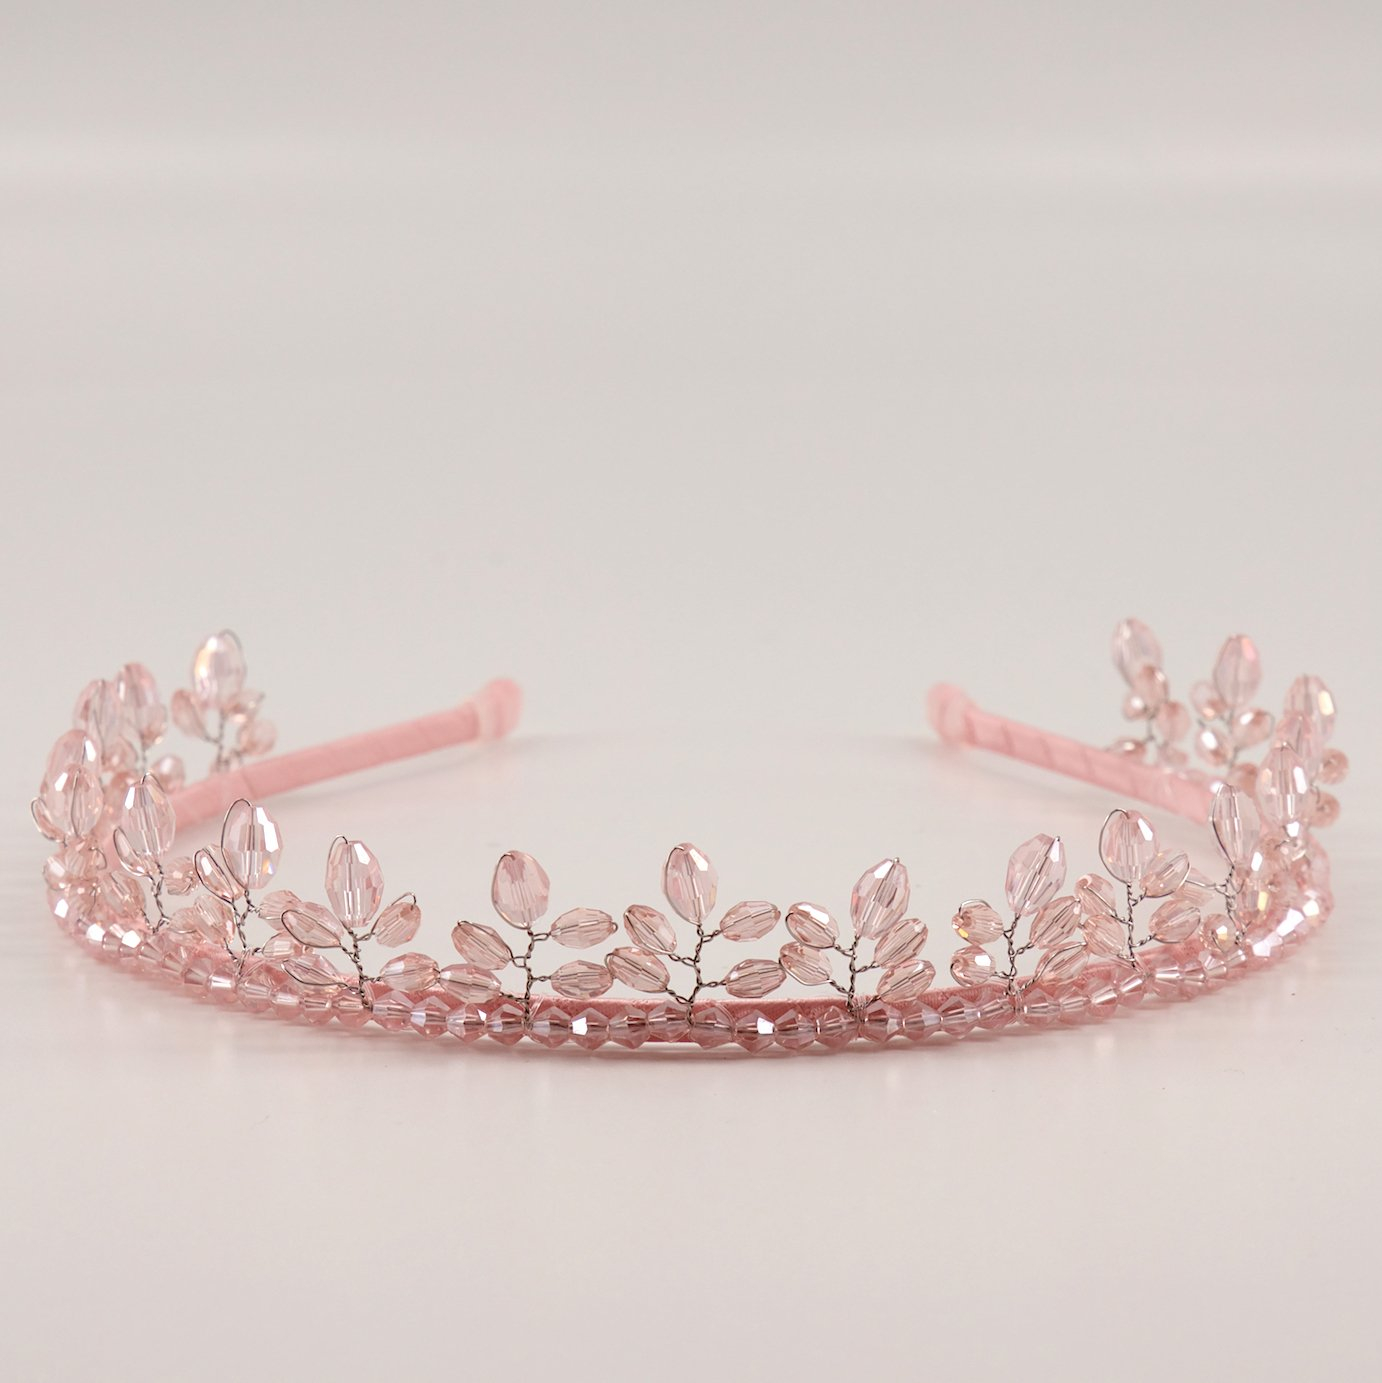 Rent Sienna Likes to Party Ethereal Princess Crystal Crown Headband in Pink